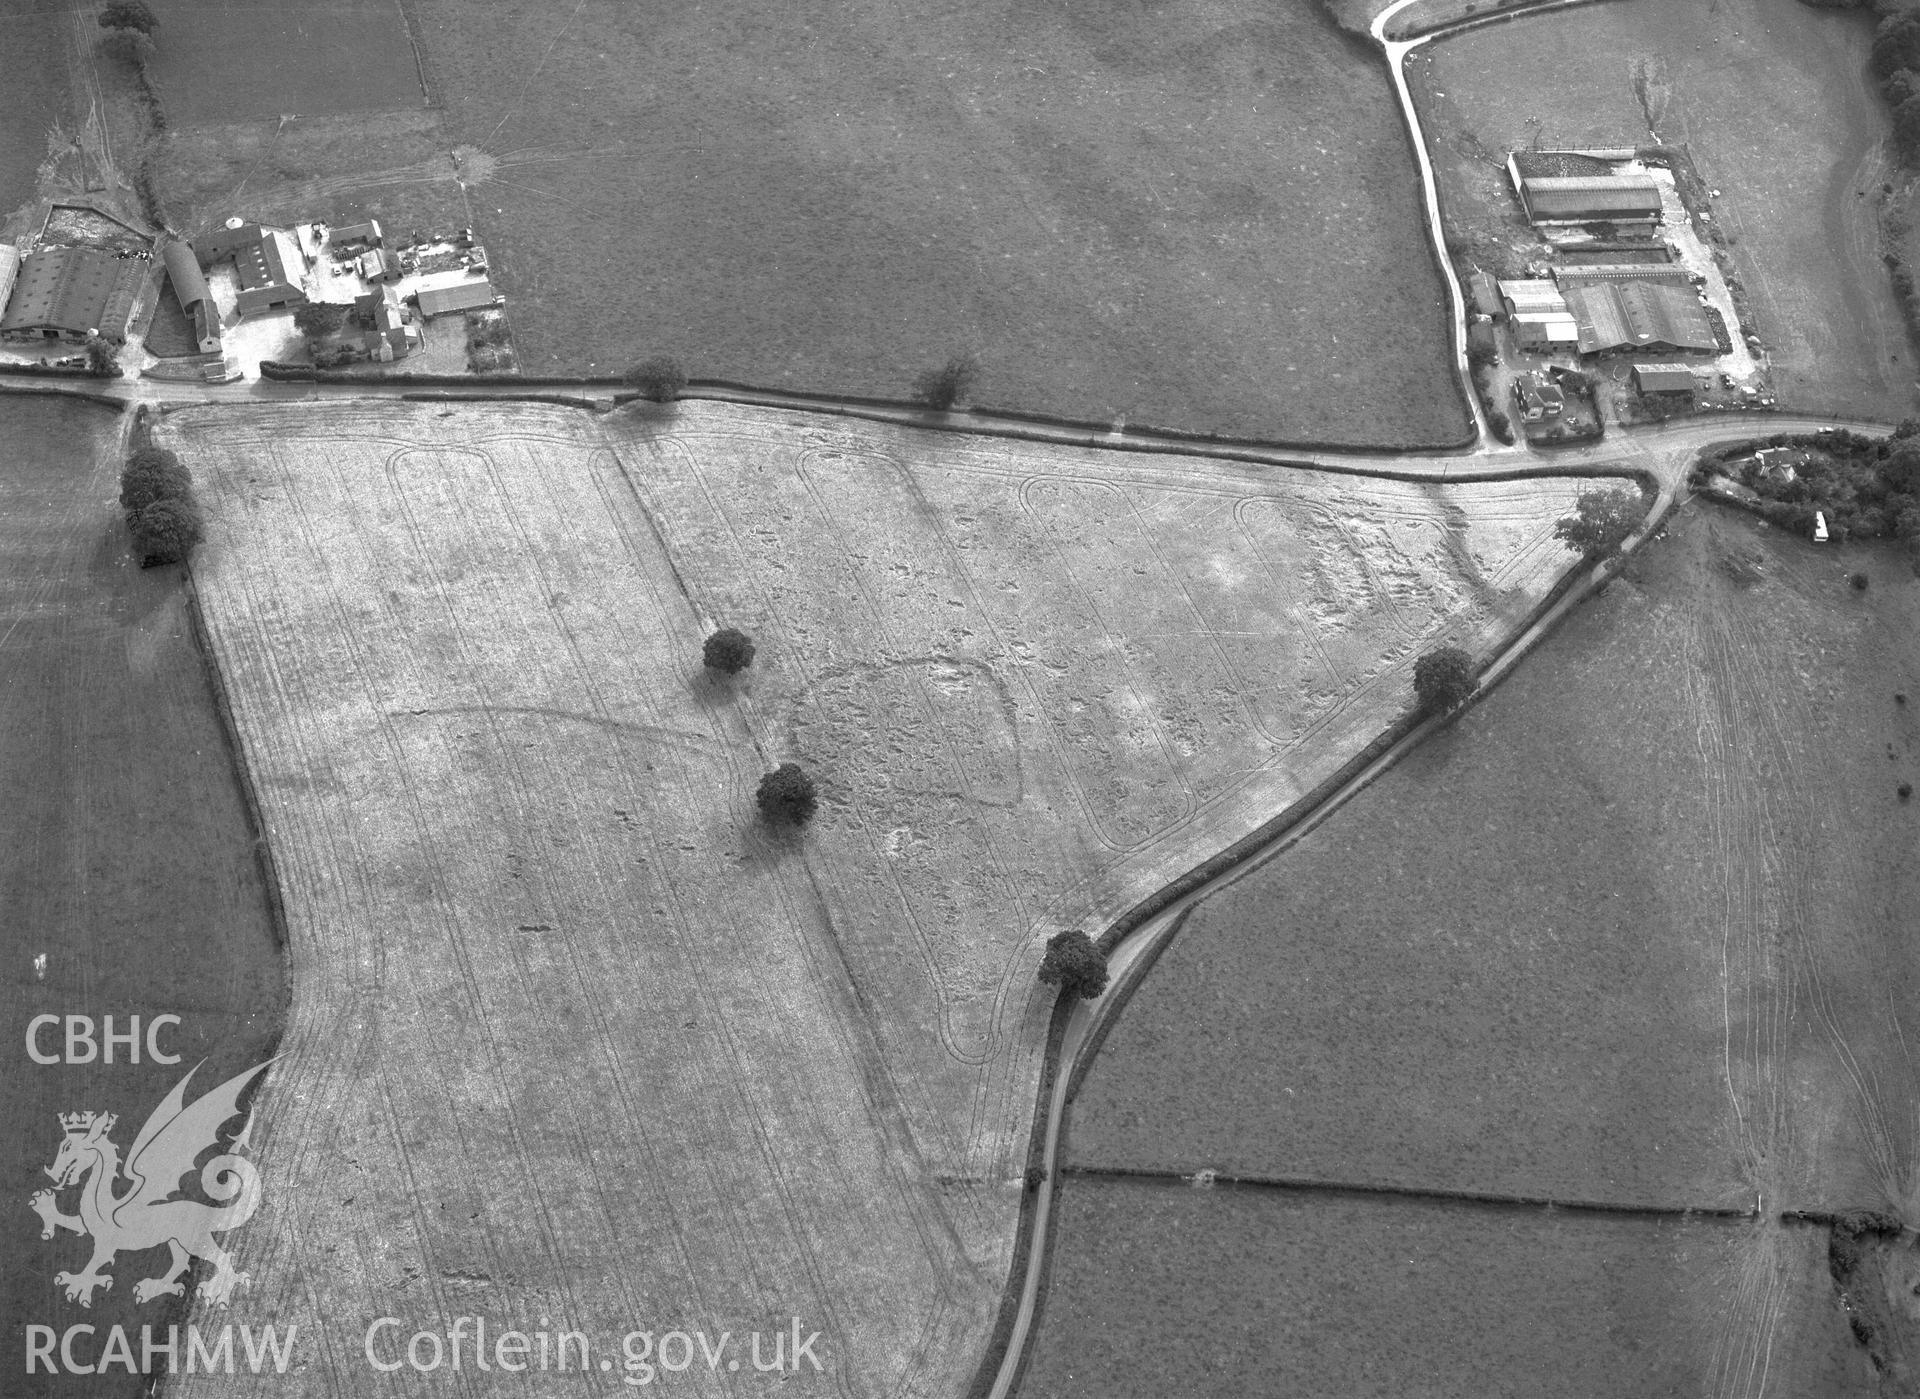 RCAHMW black and white oblique aerial photograph of cropmark enclosure SE of Rhydonnen, taken by C R Musson, 22/07/1996. Digital copy available.